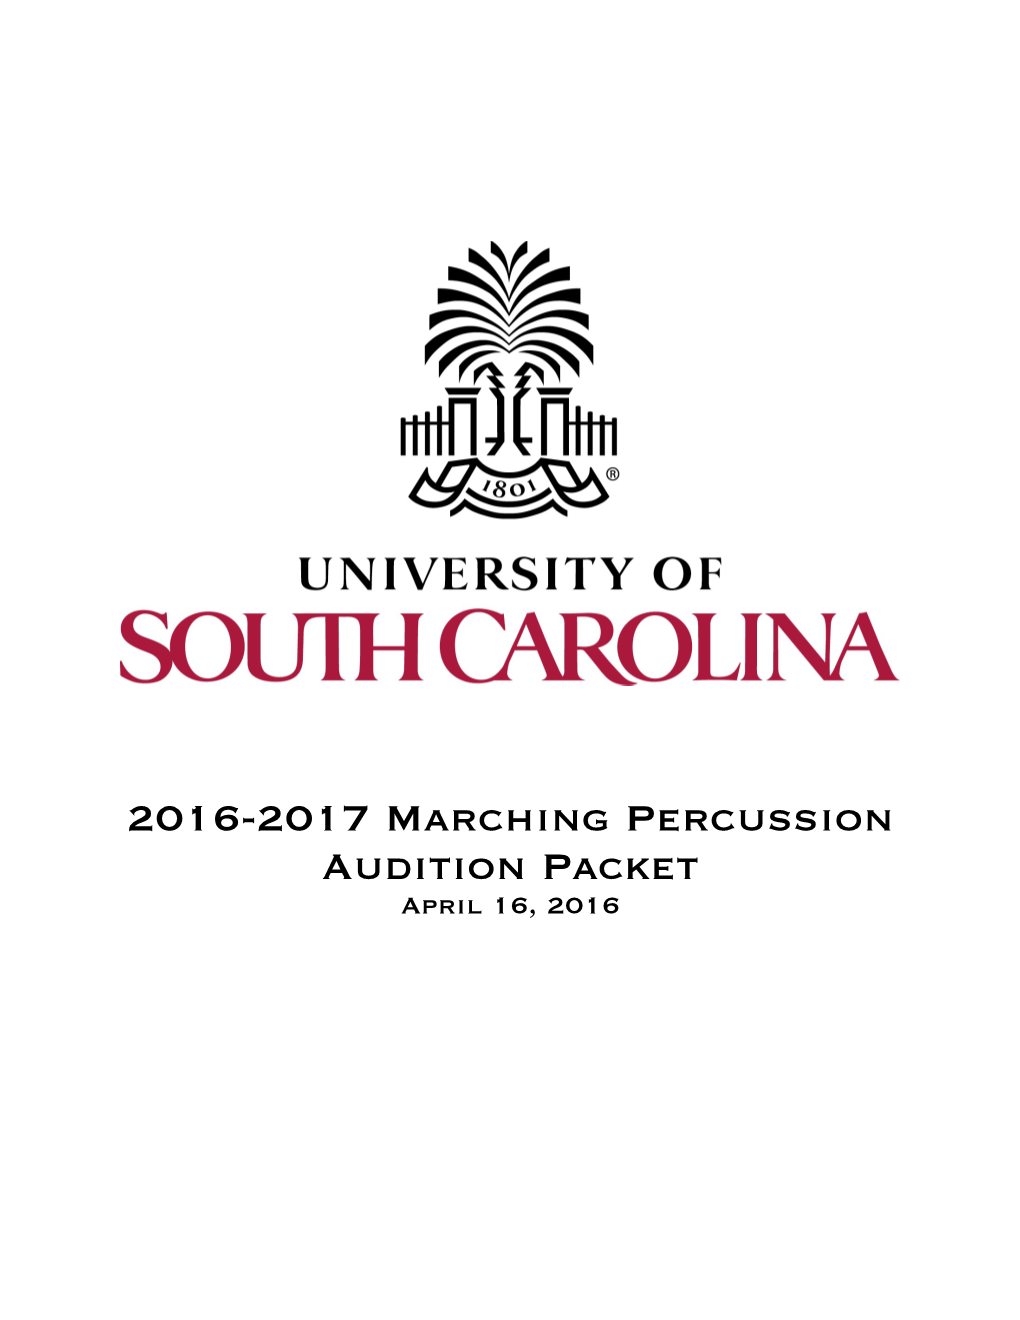 2016-2017 Marching Percussion Audition Packet April 16, 2016